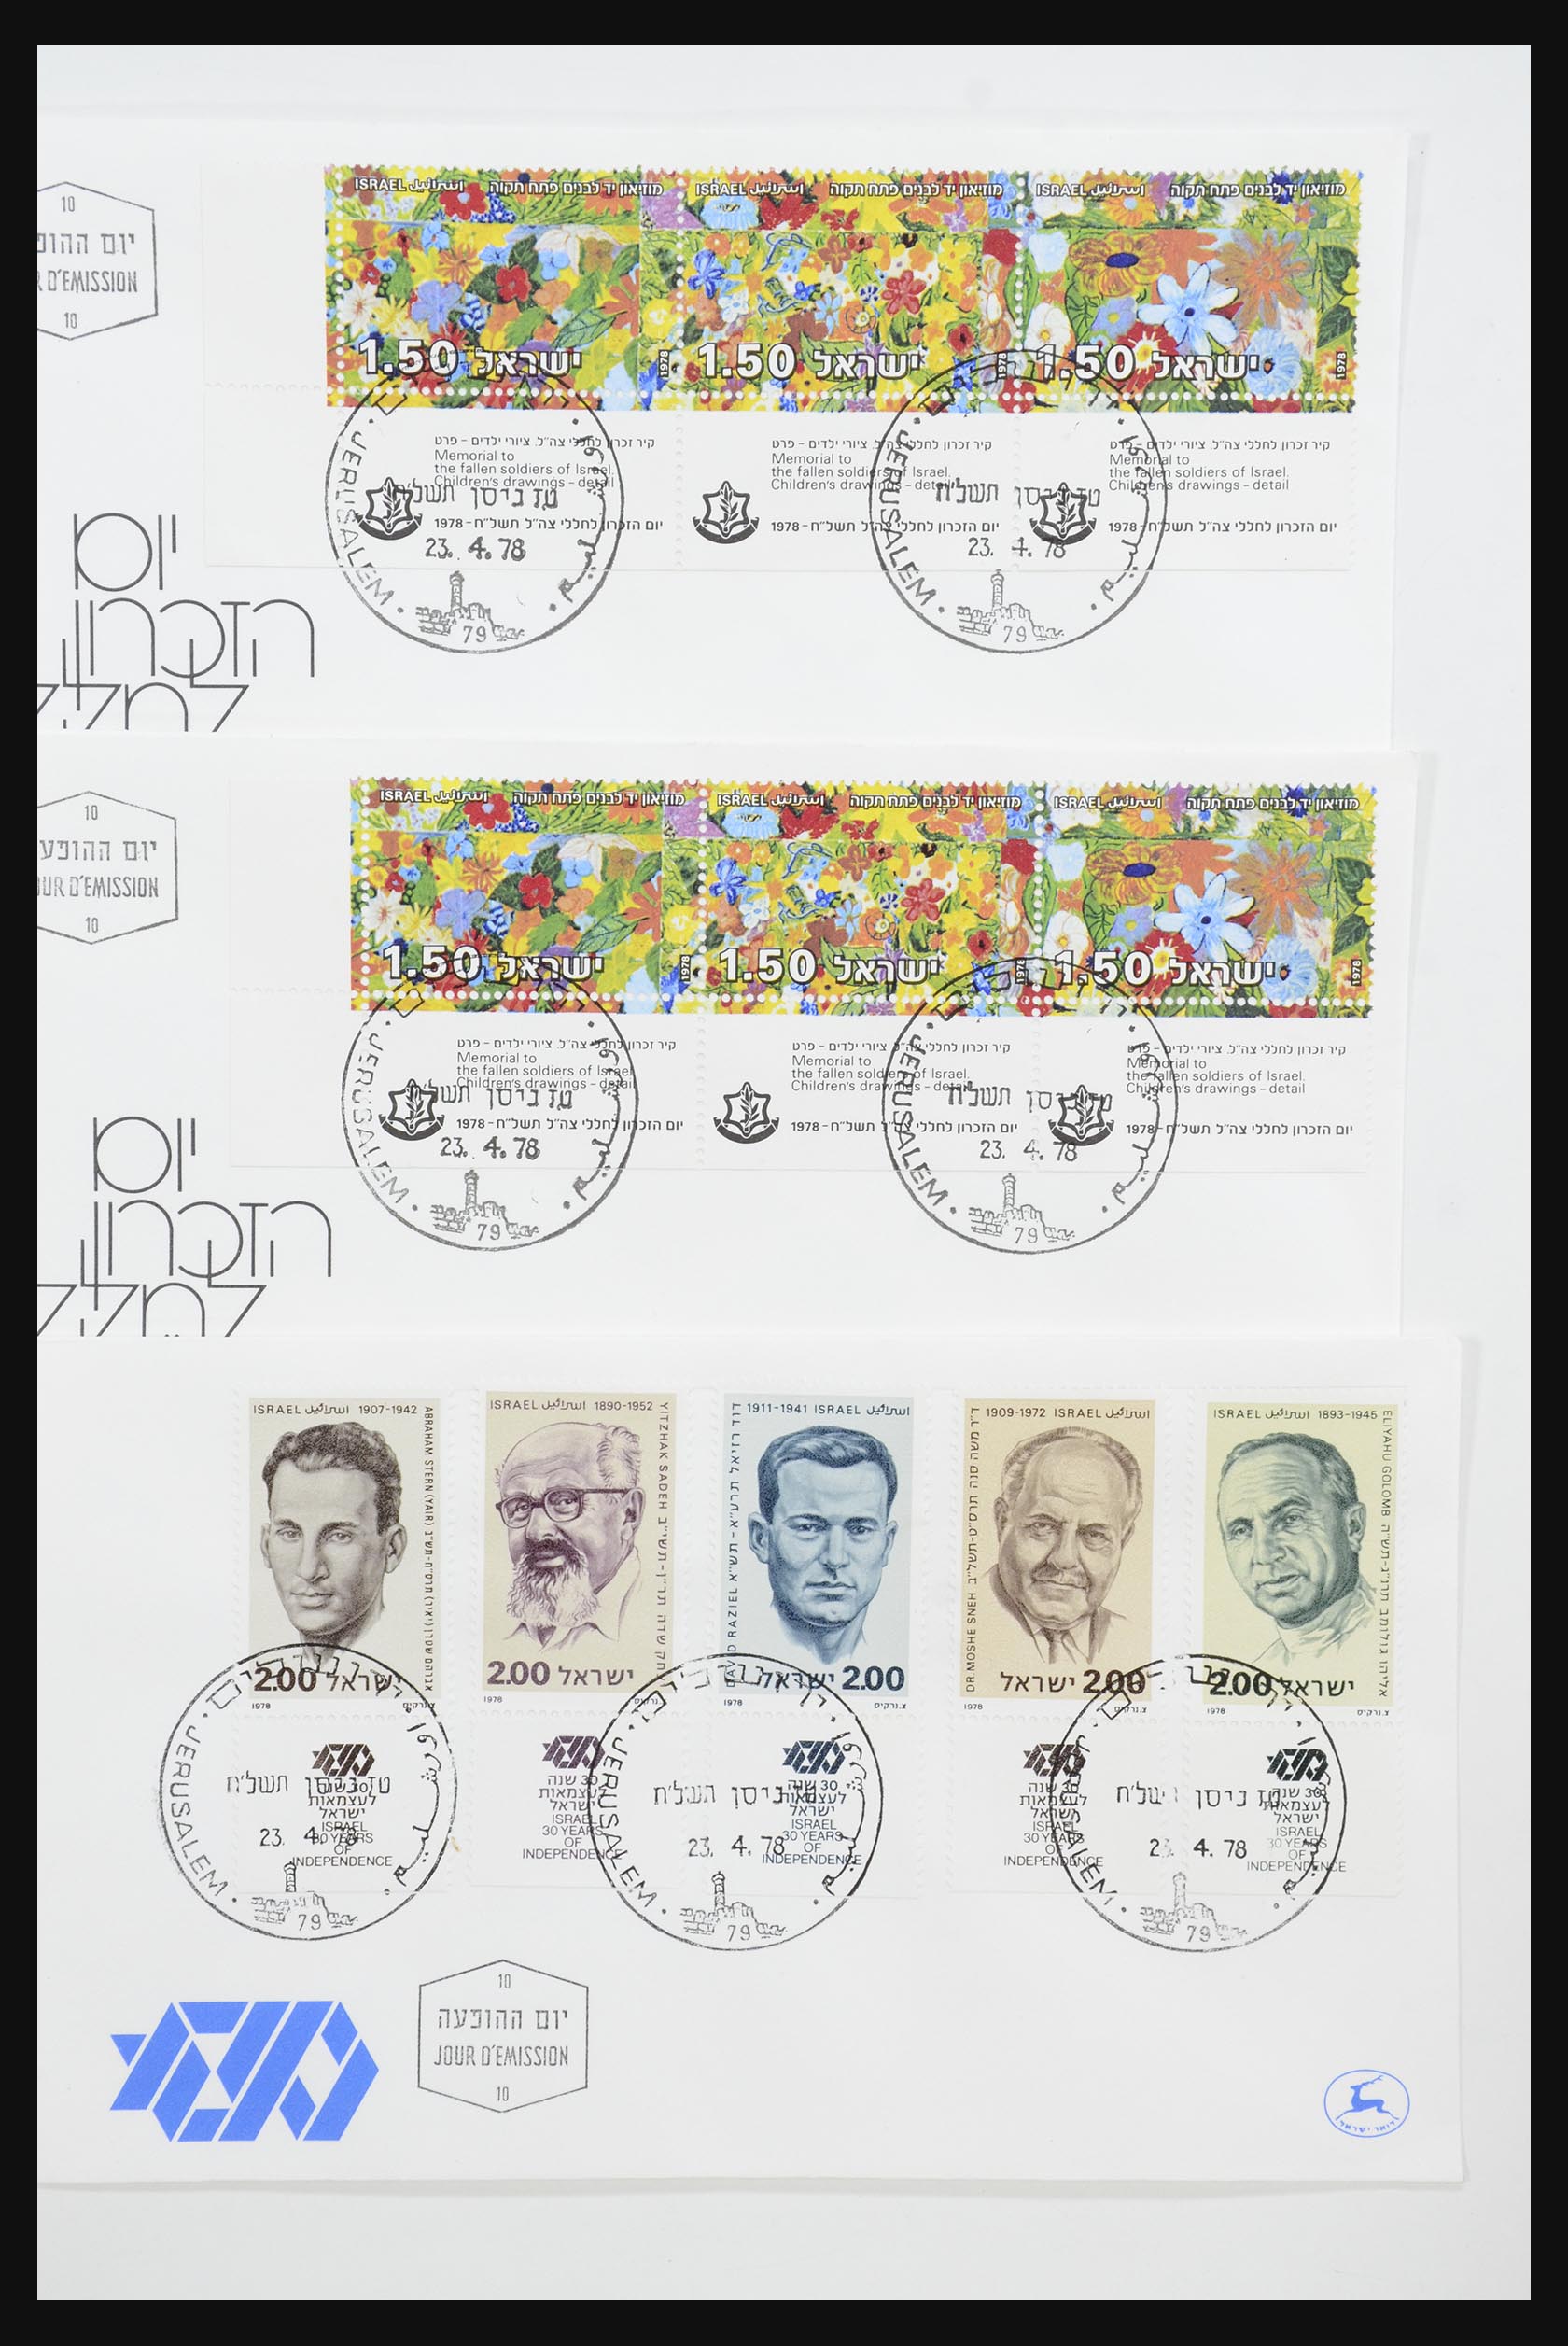 31924 006 - 31924 Israel first day cover collection 1957-2003.